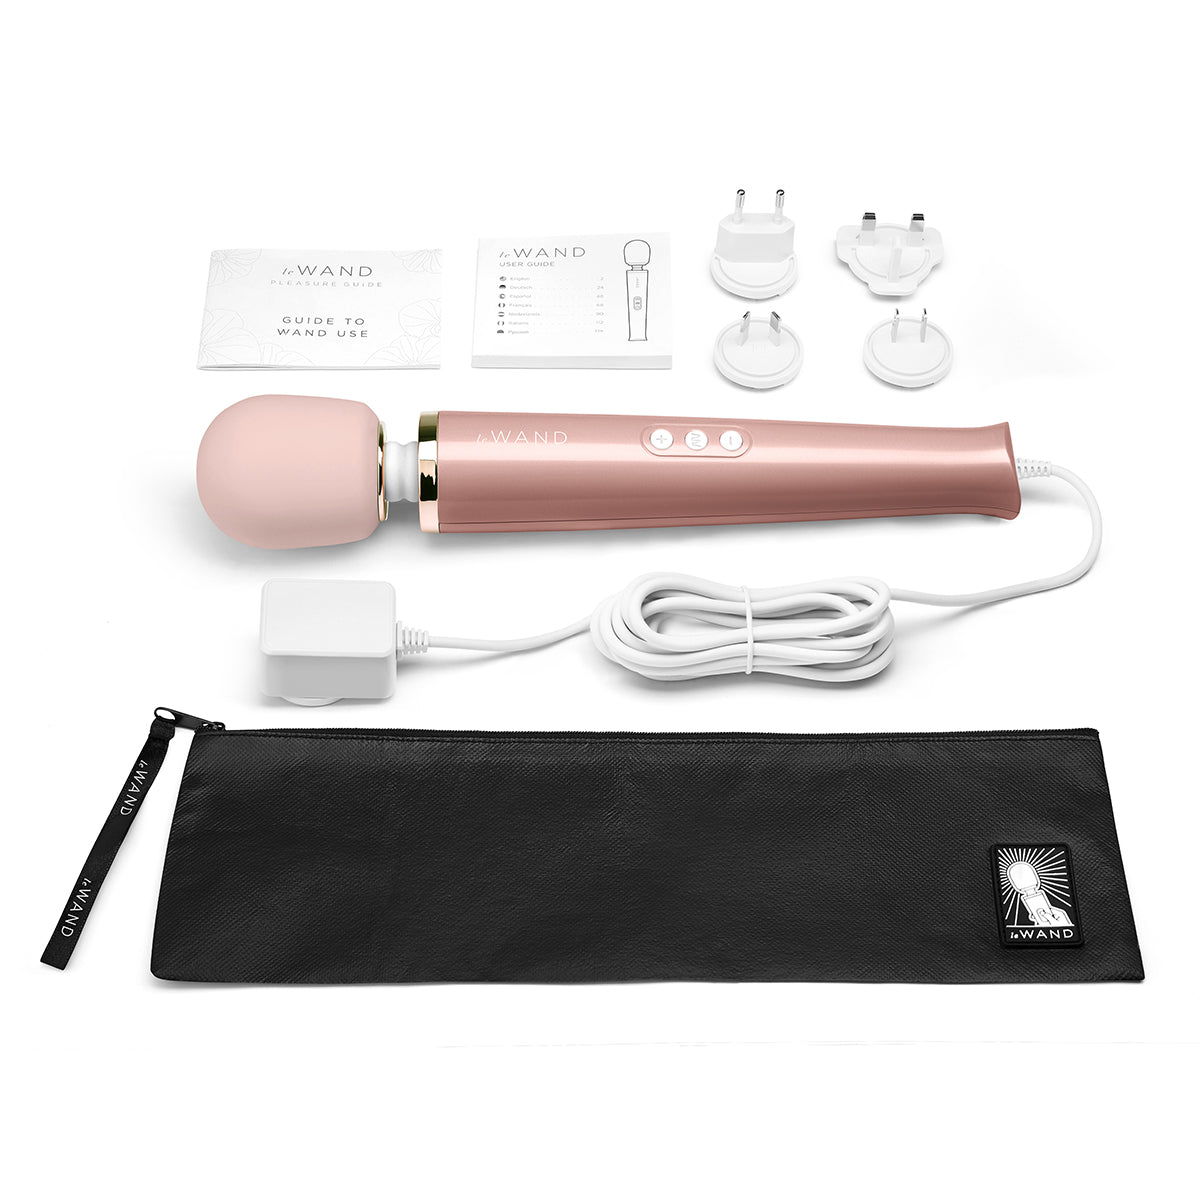 Le Wand Corded Massager - Rose Gold